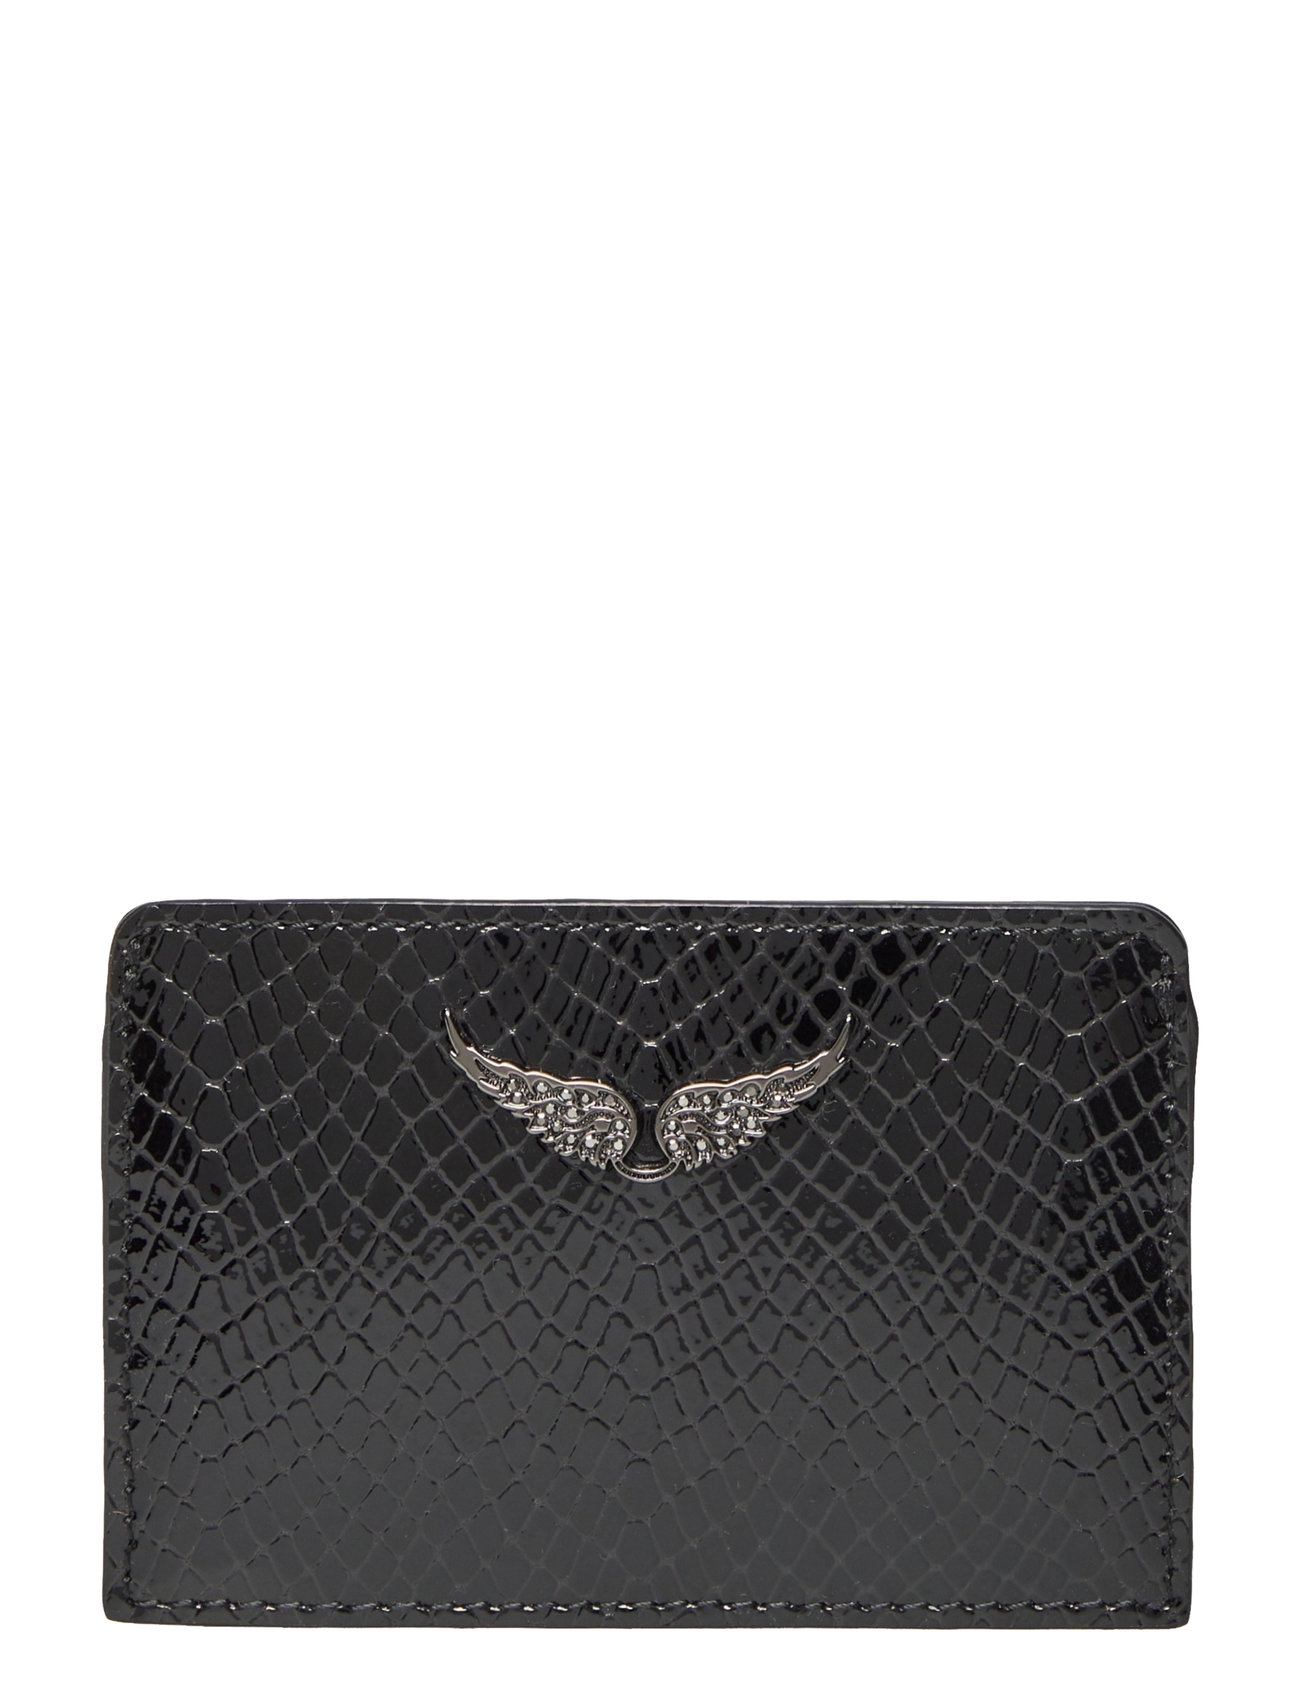 Zv Pass Glossy Wild Bags Card Holders & Wallets Card Holder Black Zadig & Voltaire